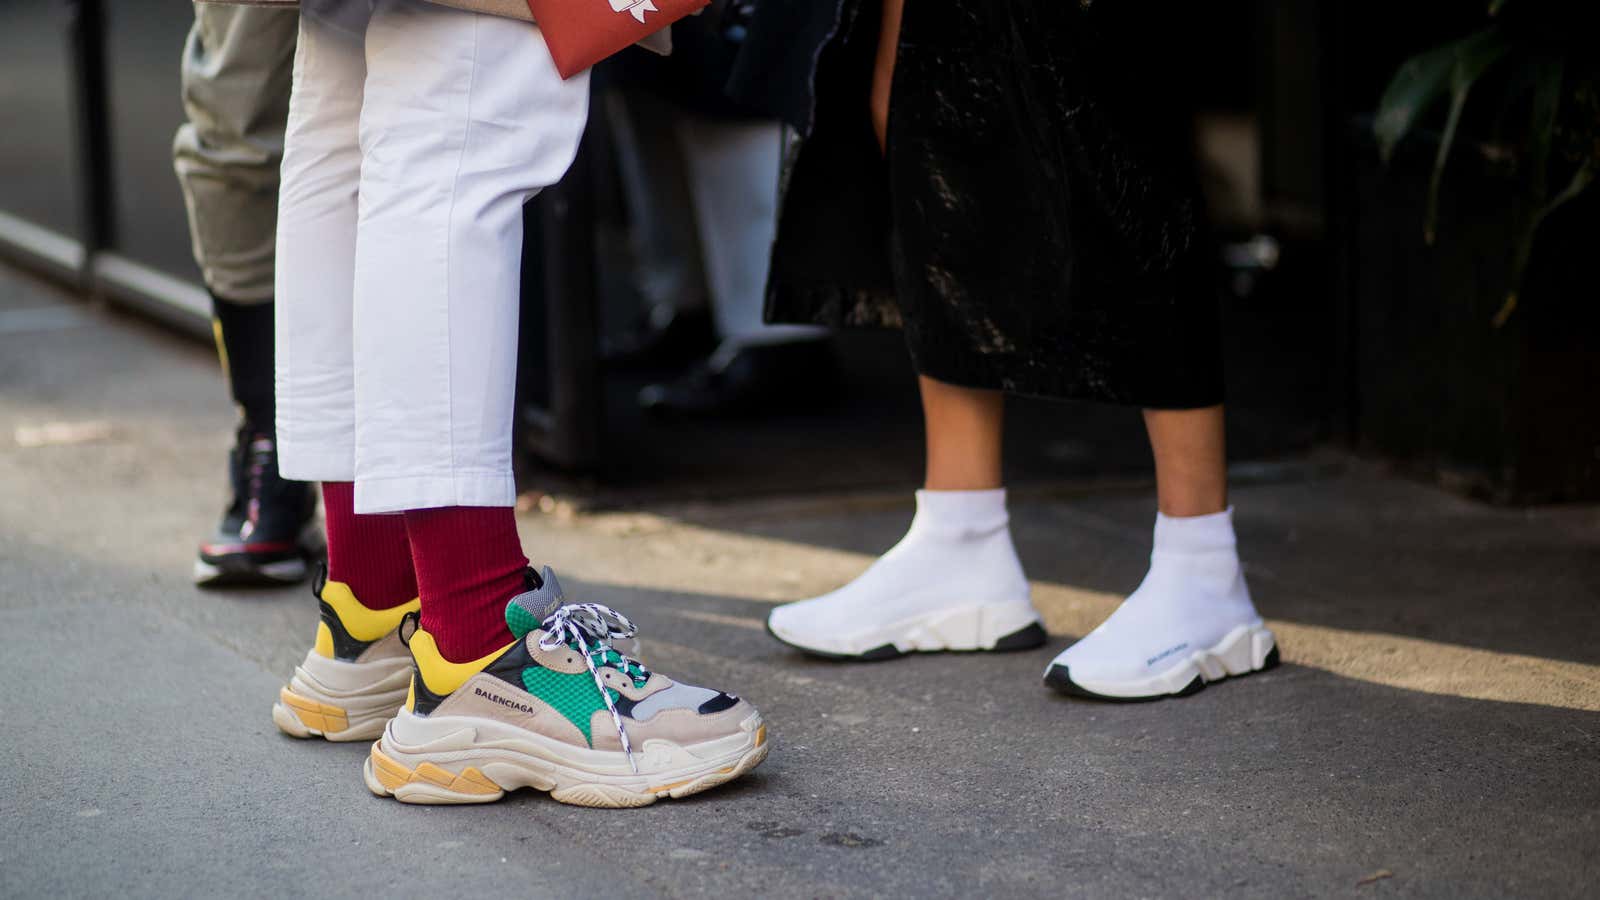 At left, the Balenciaga Triple S, which currently retails for $950.